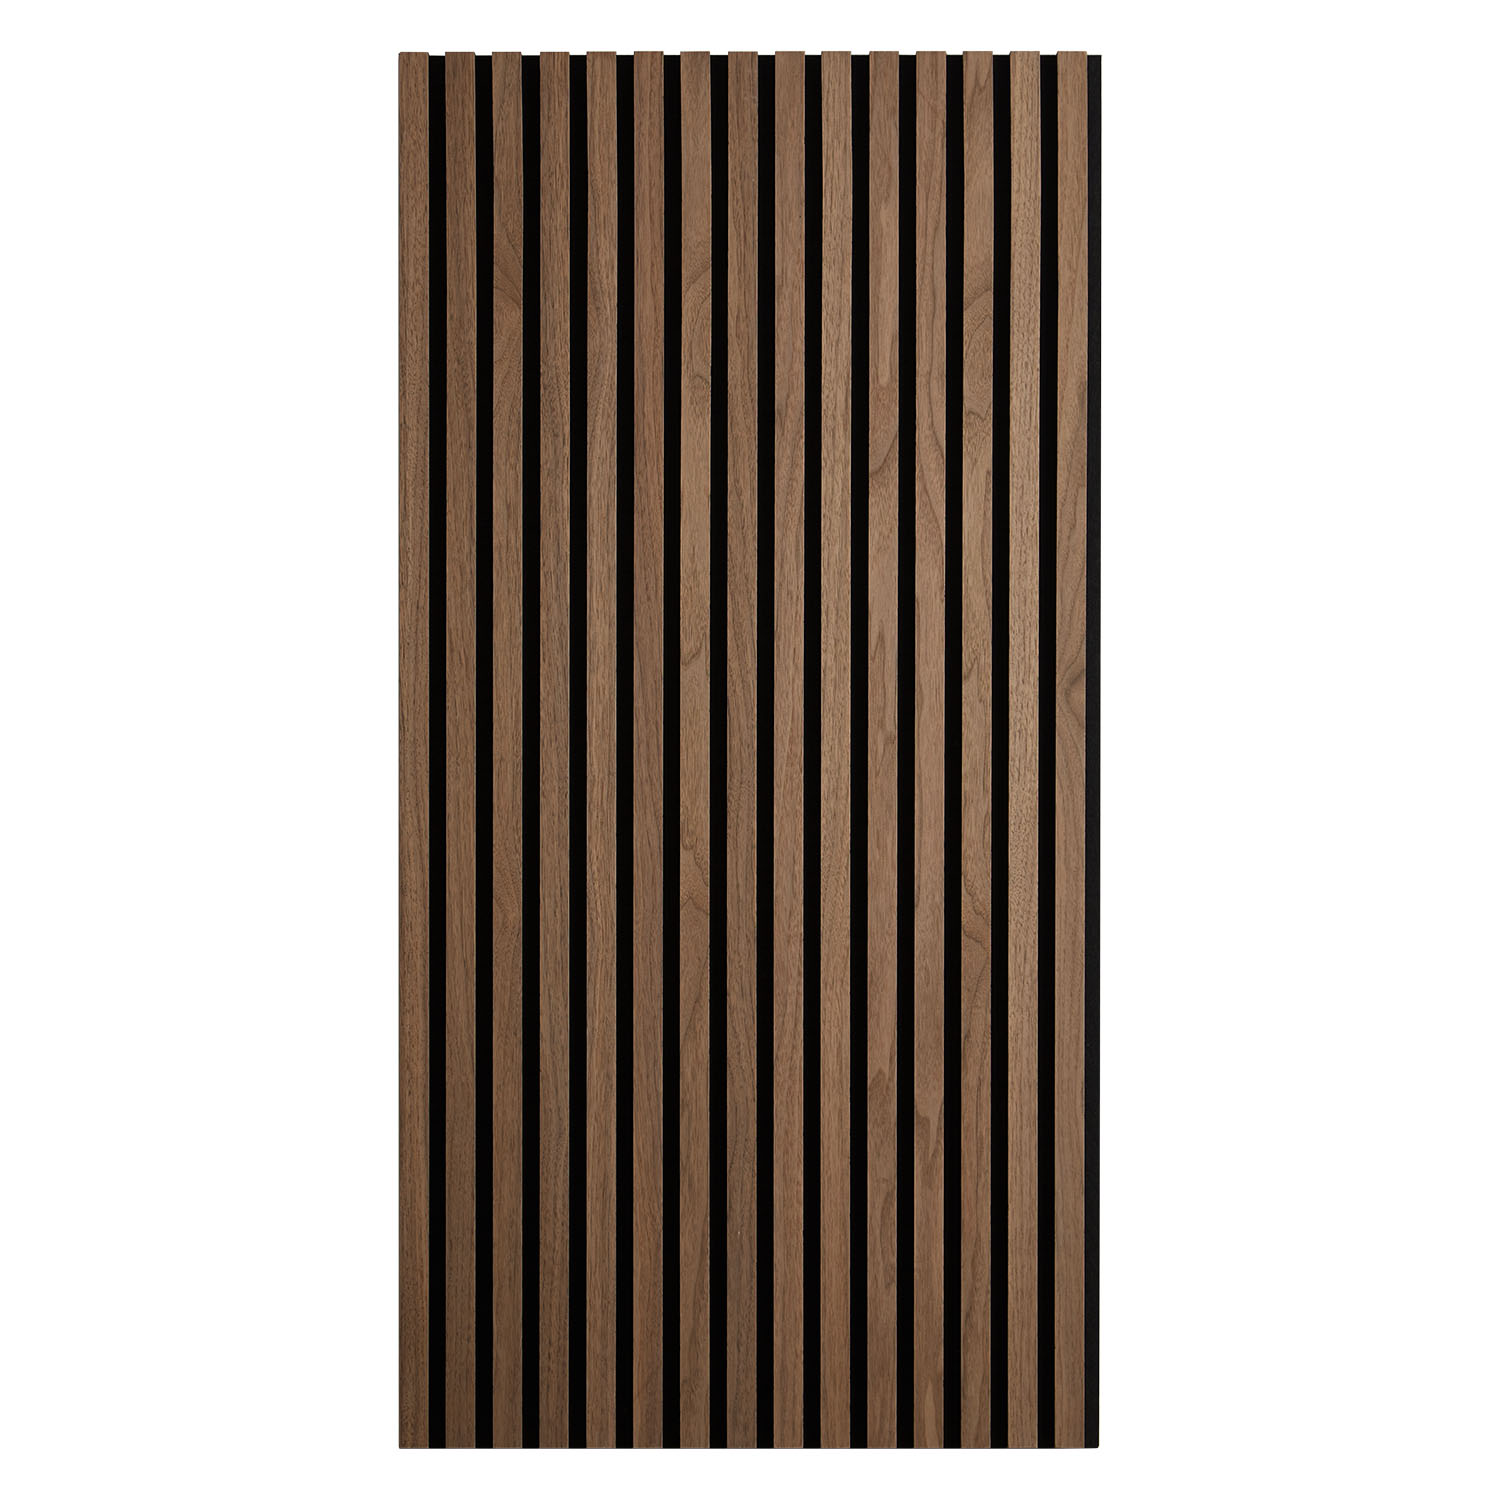 2 Wall panels 60 x 120 cm Brown Wood paneling for walls Acoustic panels Bedroom paneling Wall cladding Acoustic sound panels Sound proof panels